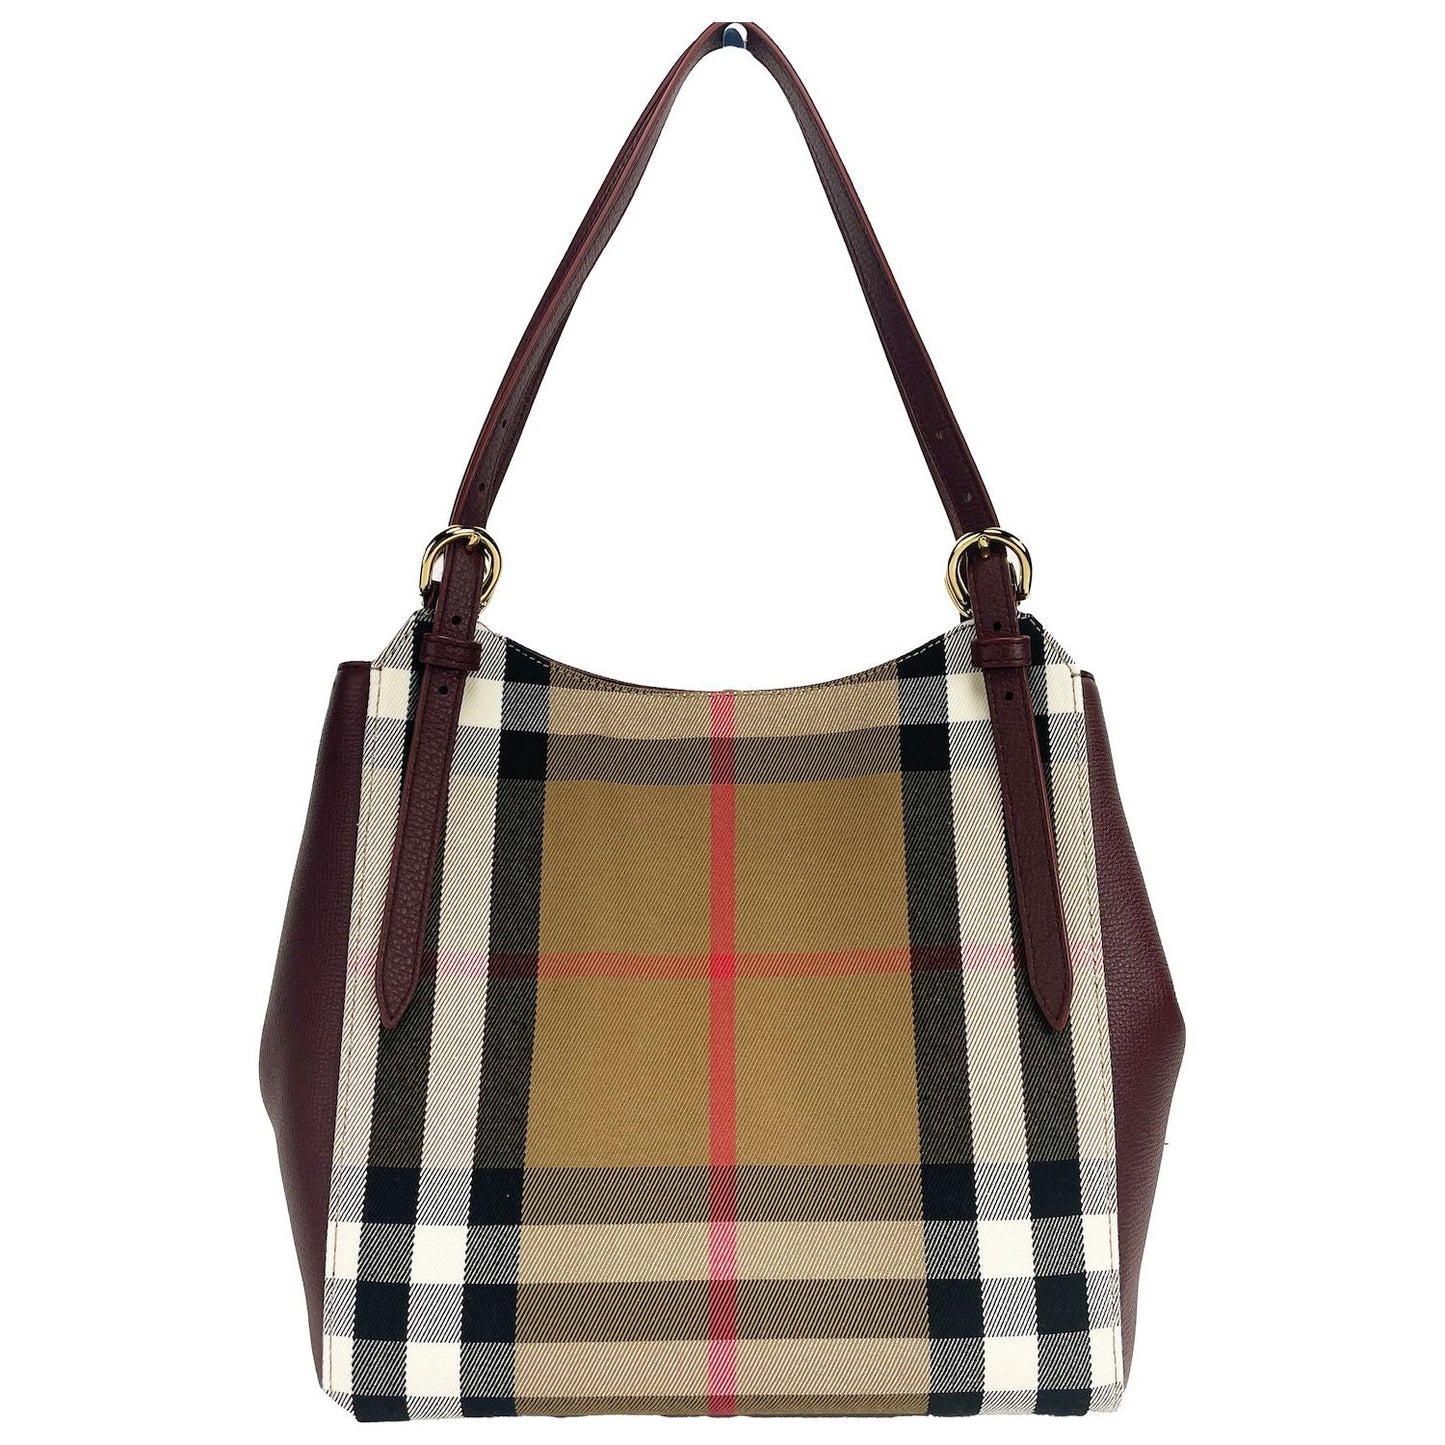 Burberry Small Canterby Mahogany Leather Check Canvas Tote Bag Purse small-canterby-mahogany-leather-check-canvas-tote-bag-purse